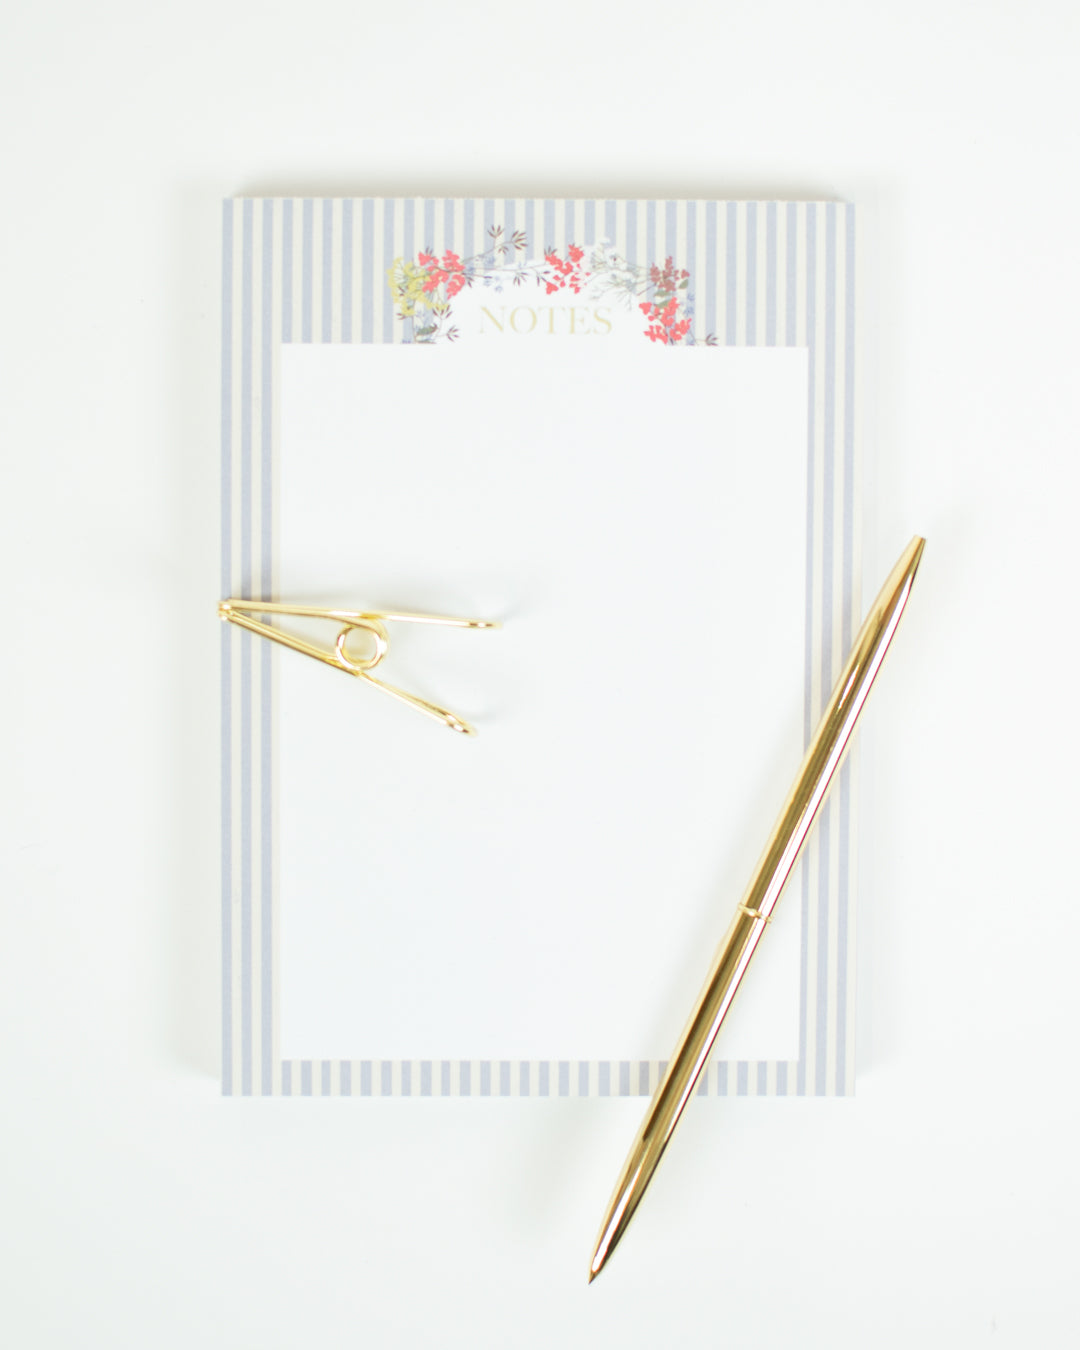 2023 Planner + Journal + Notepad Bundle: The Claire